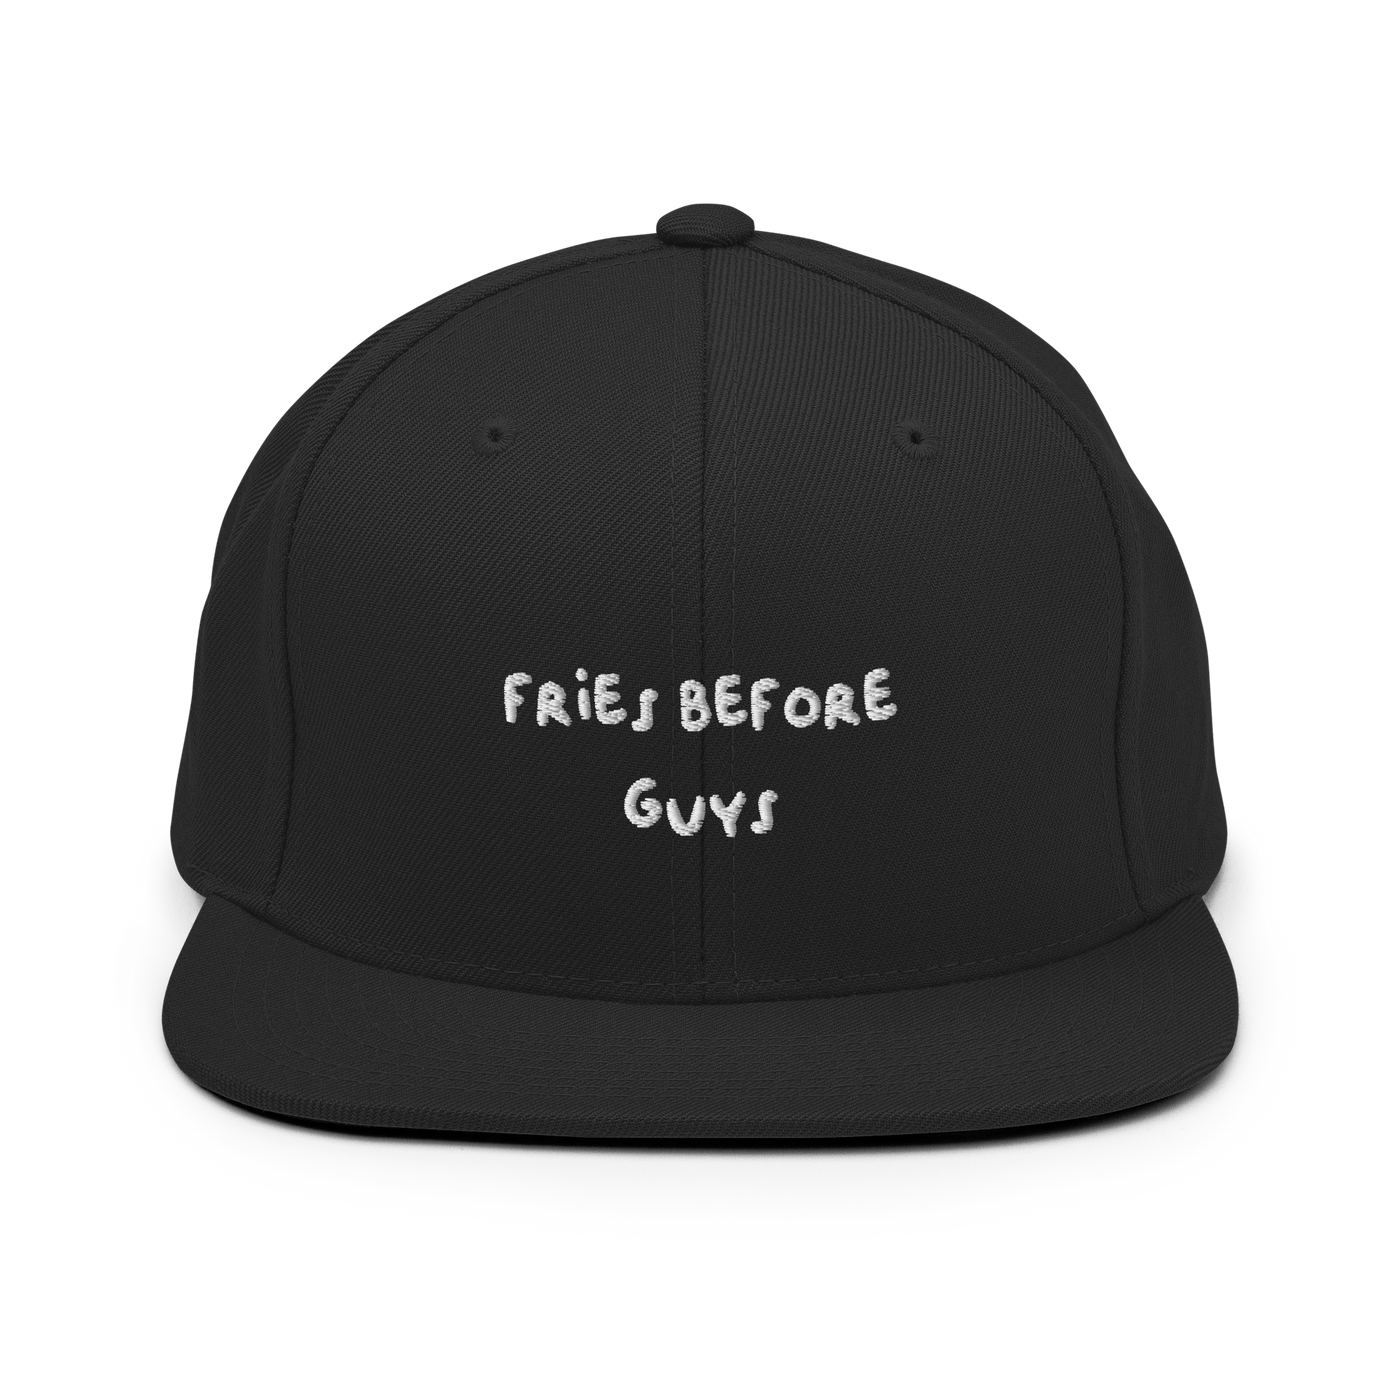 Fries Before Guys Snapback Hat - Black - - Just Another Cap Store